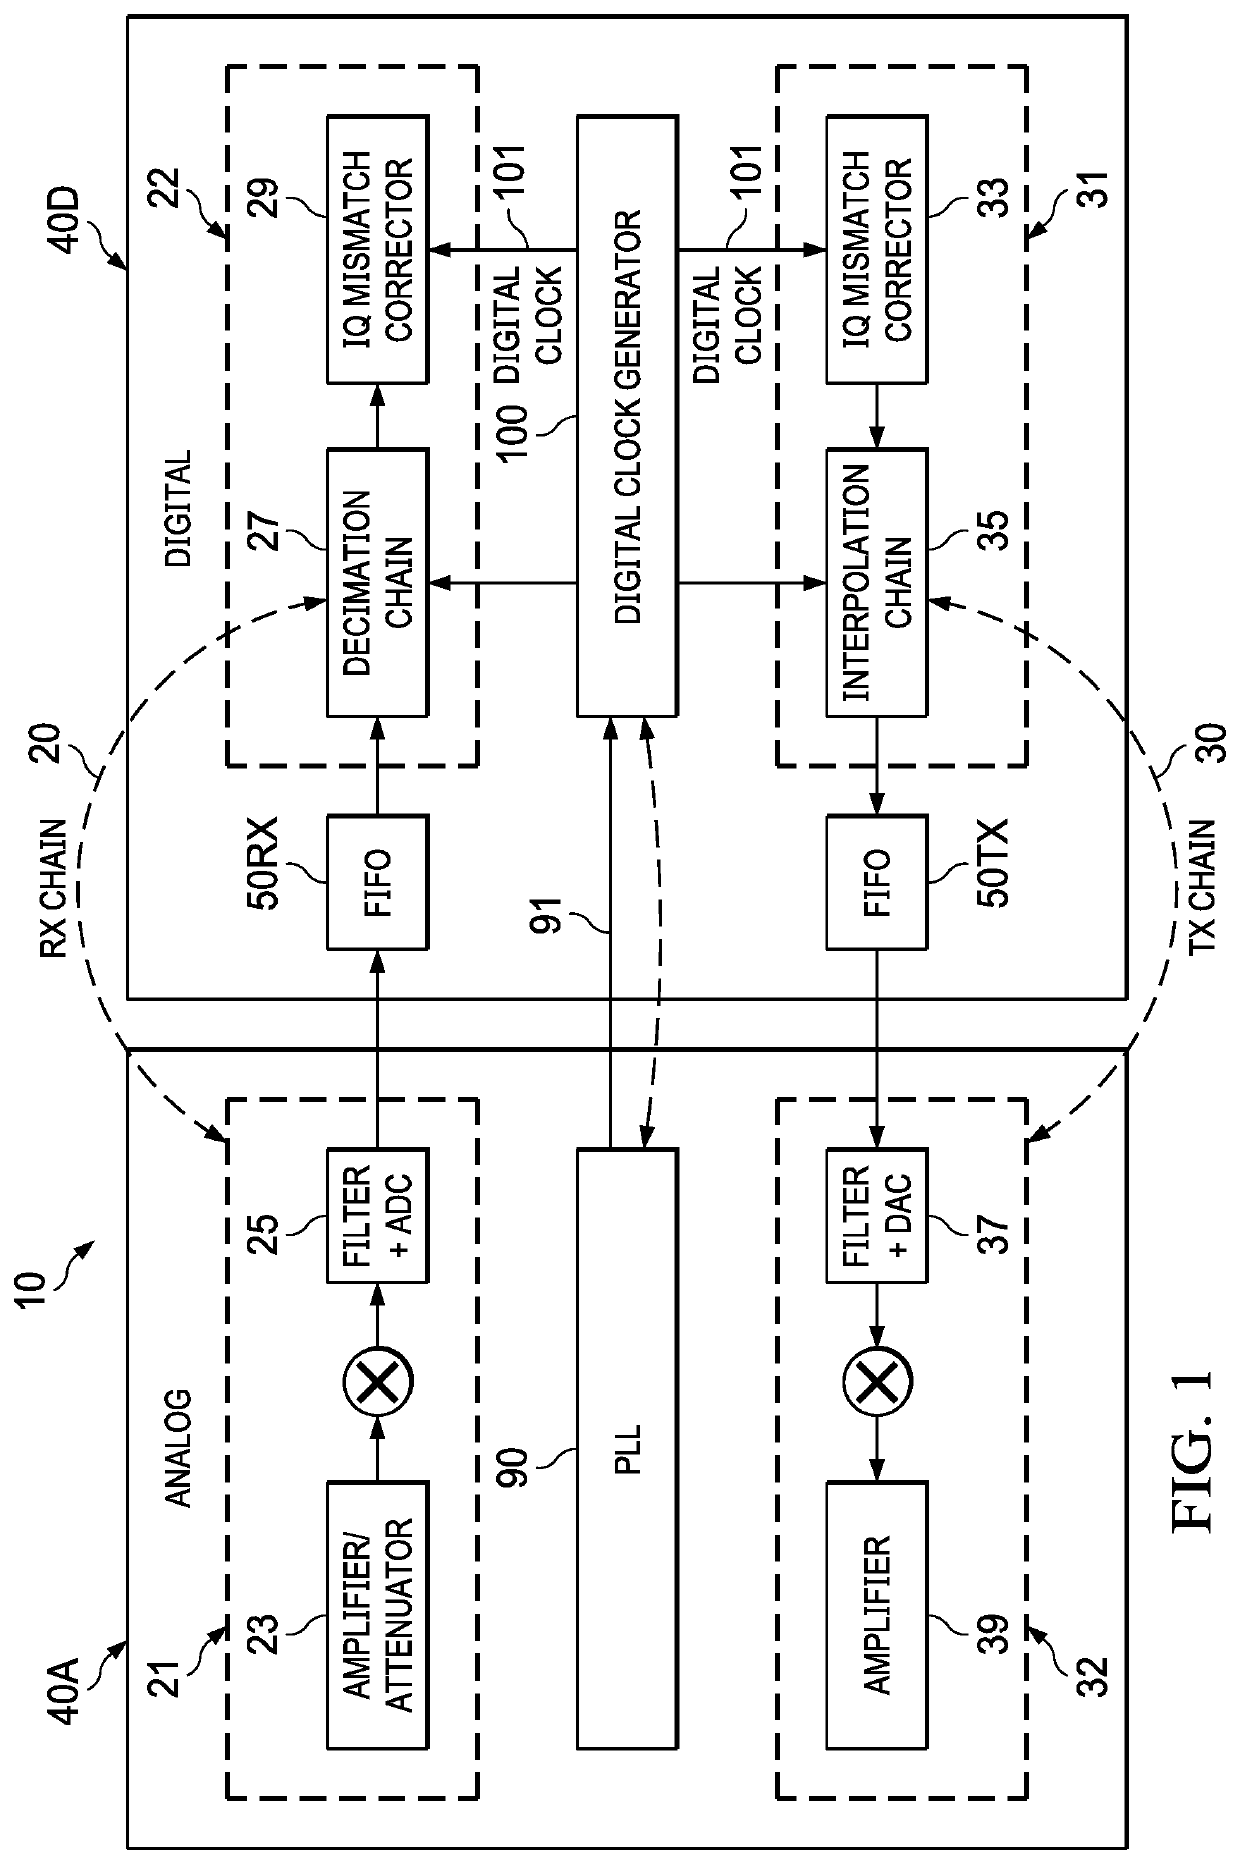 Digital clock generation with randomized division of a source clock